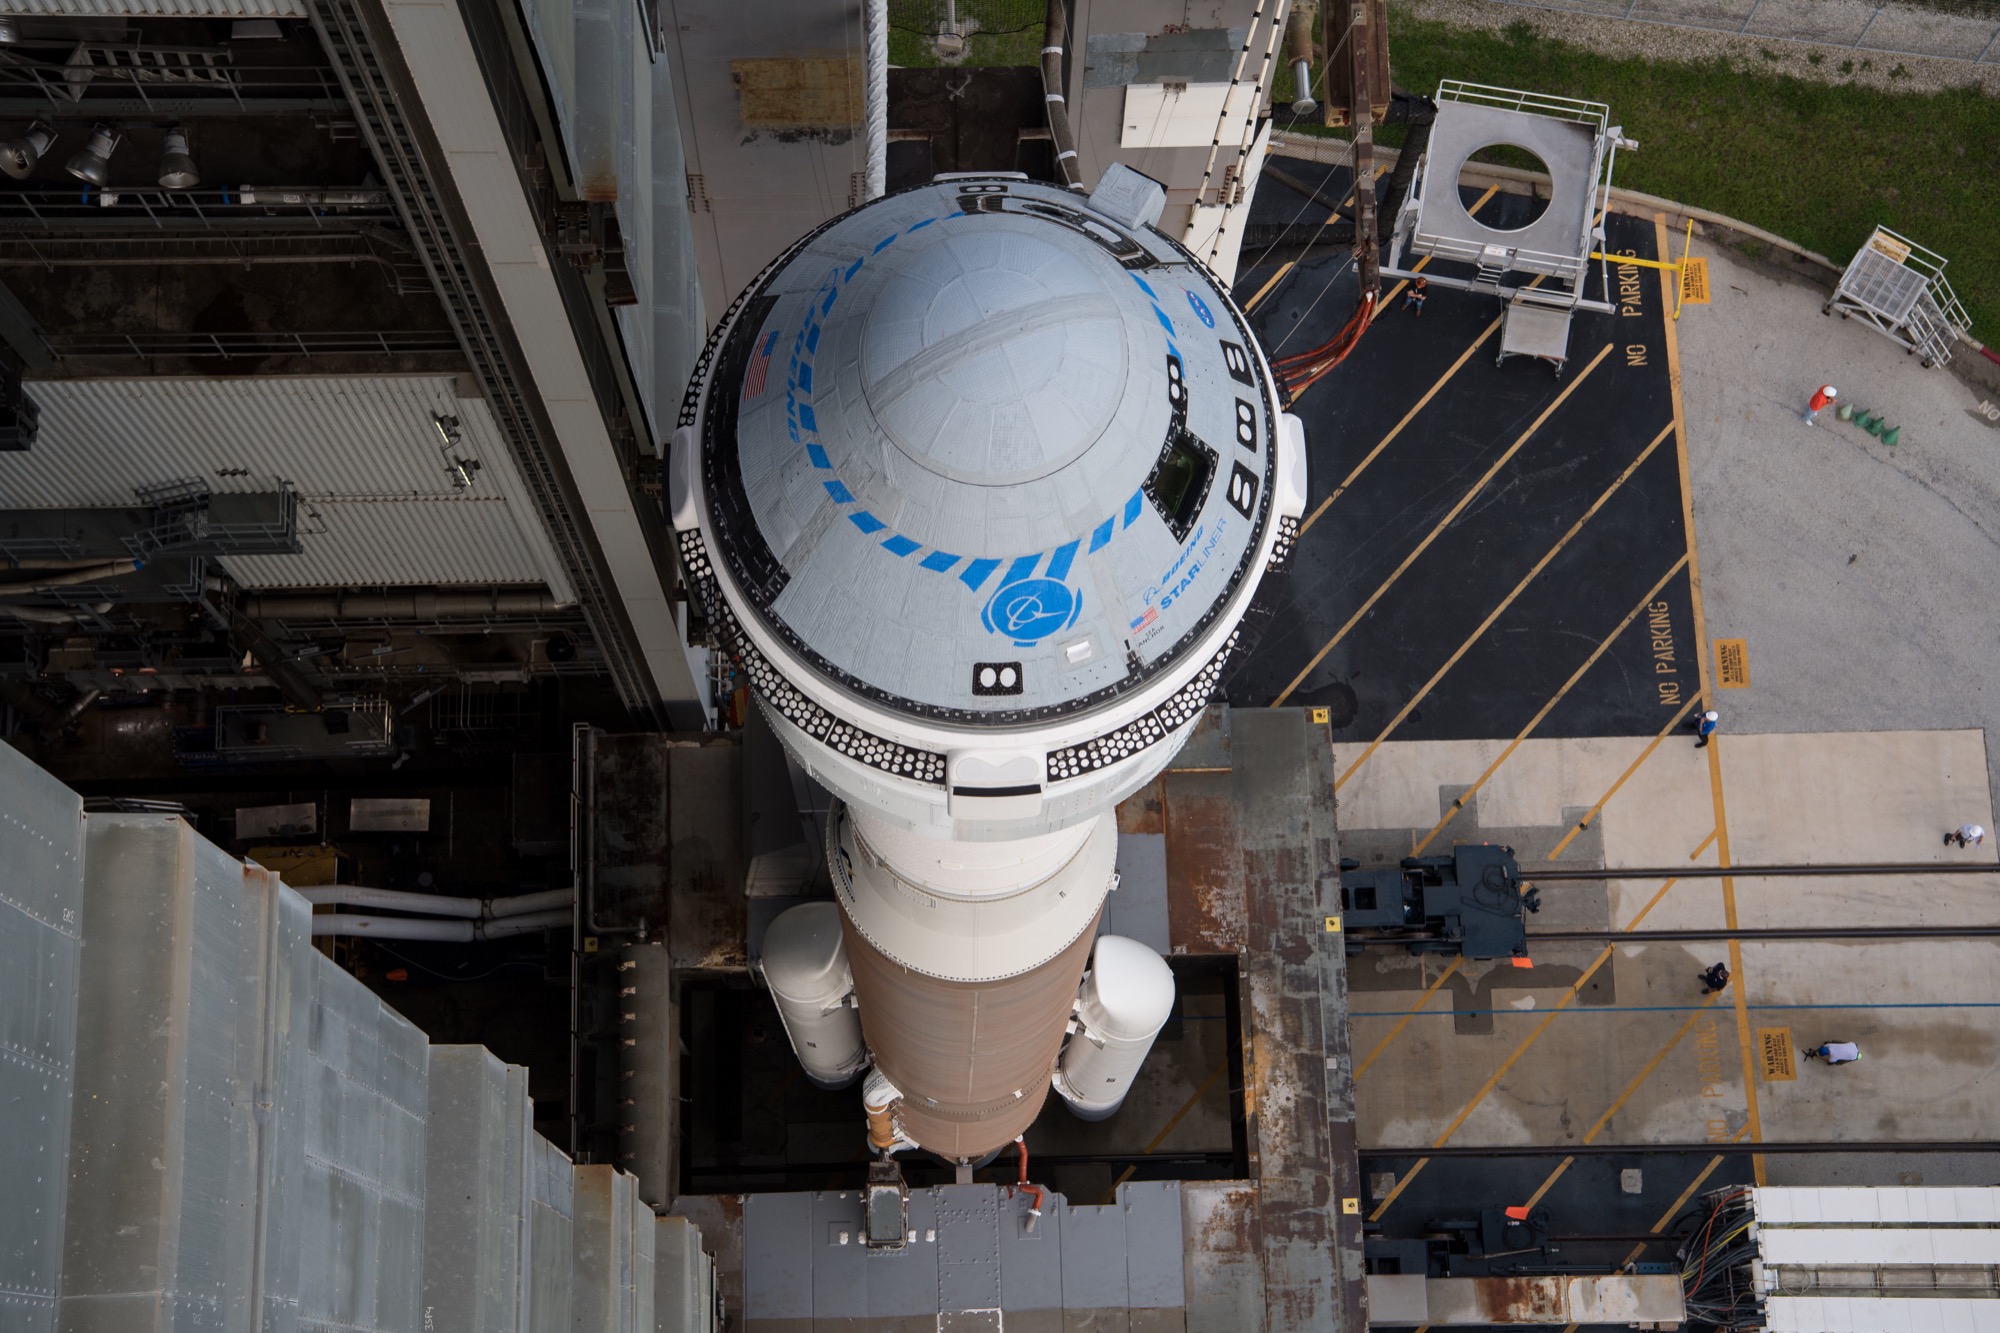 a blue and gray space capsule on top of a tall rocket positioned on a launch pad